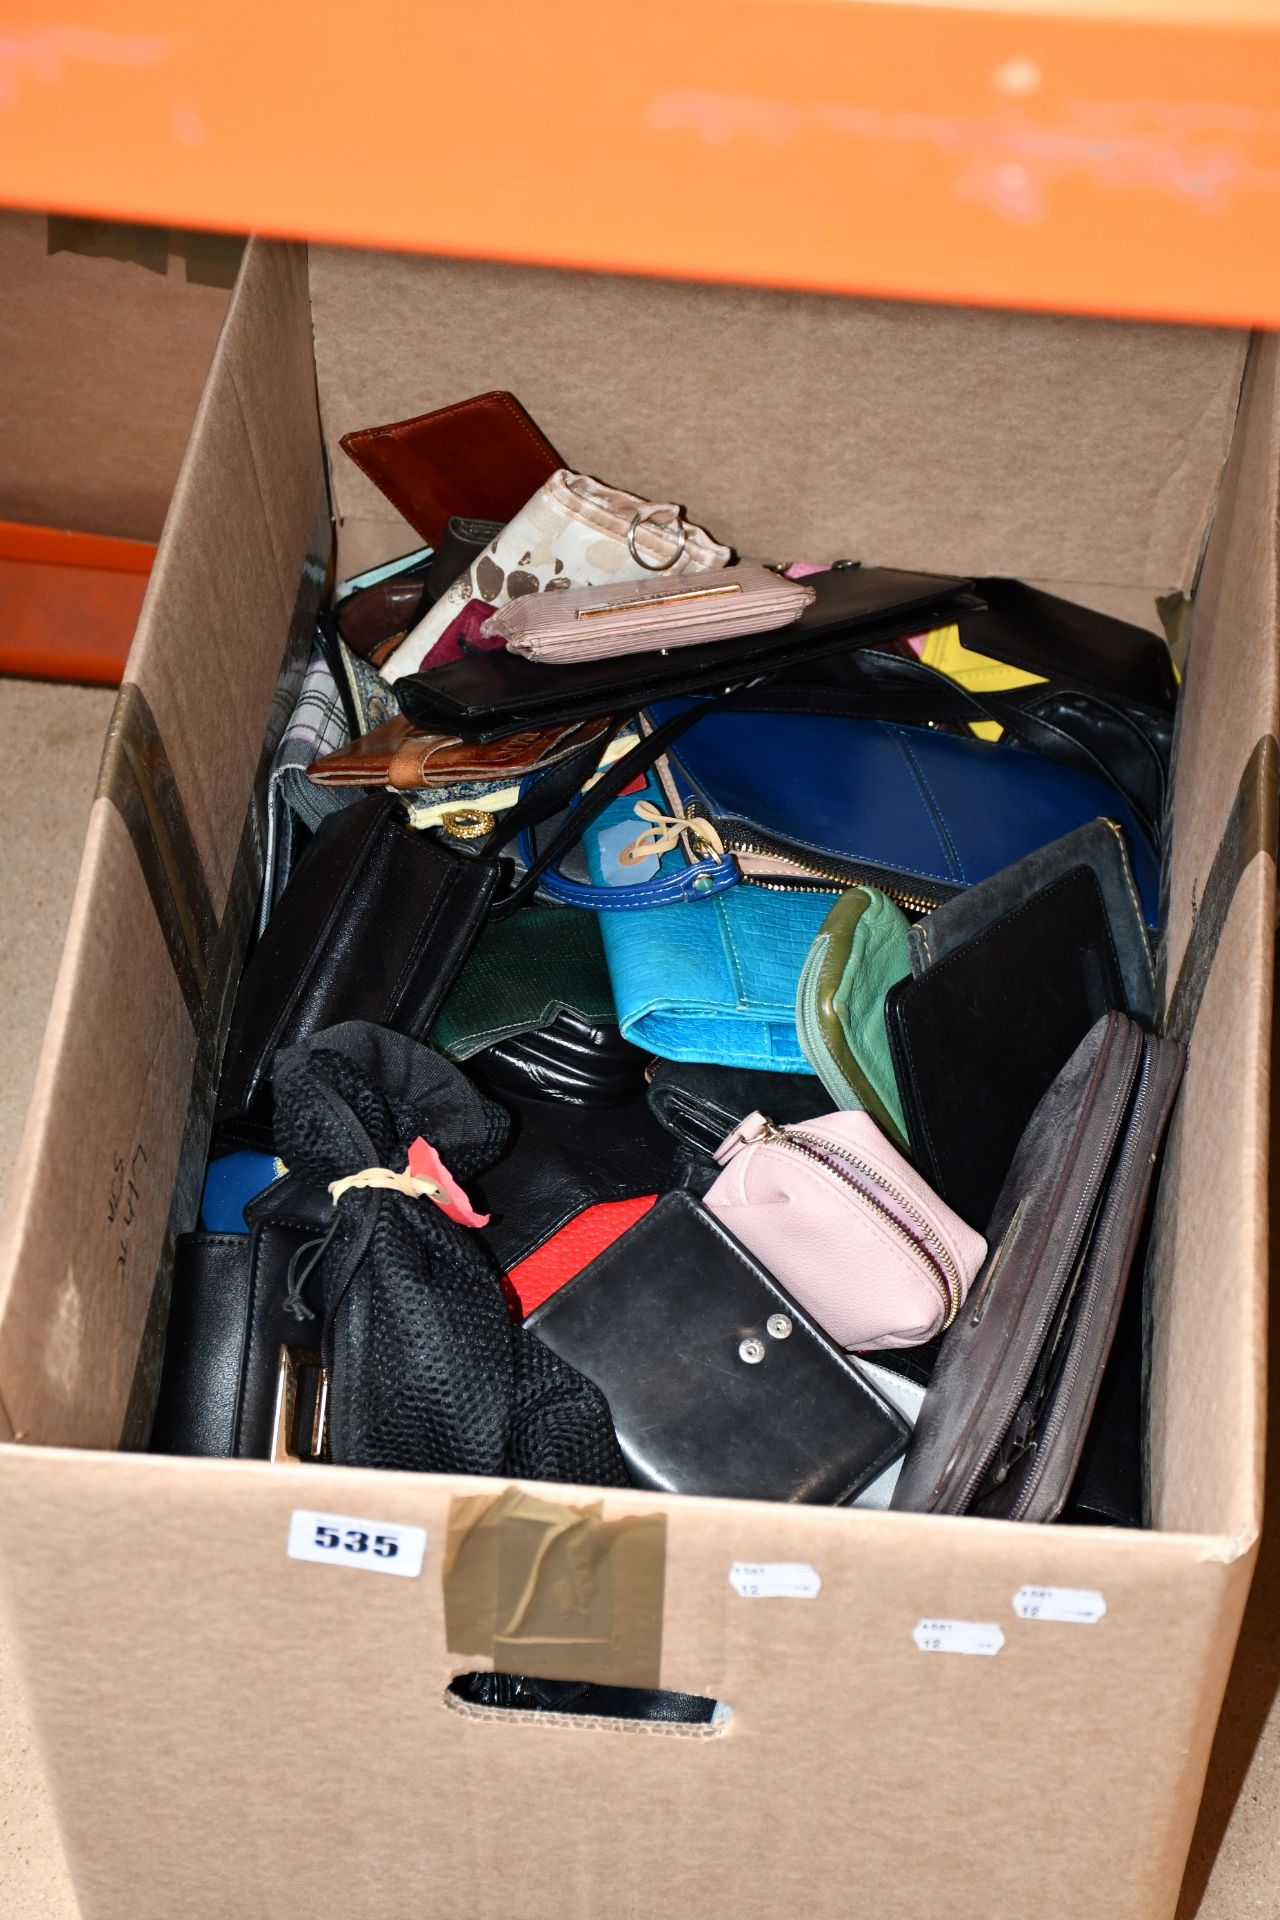 A box of assorted wallets/purses and related items.